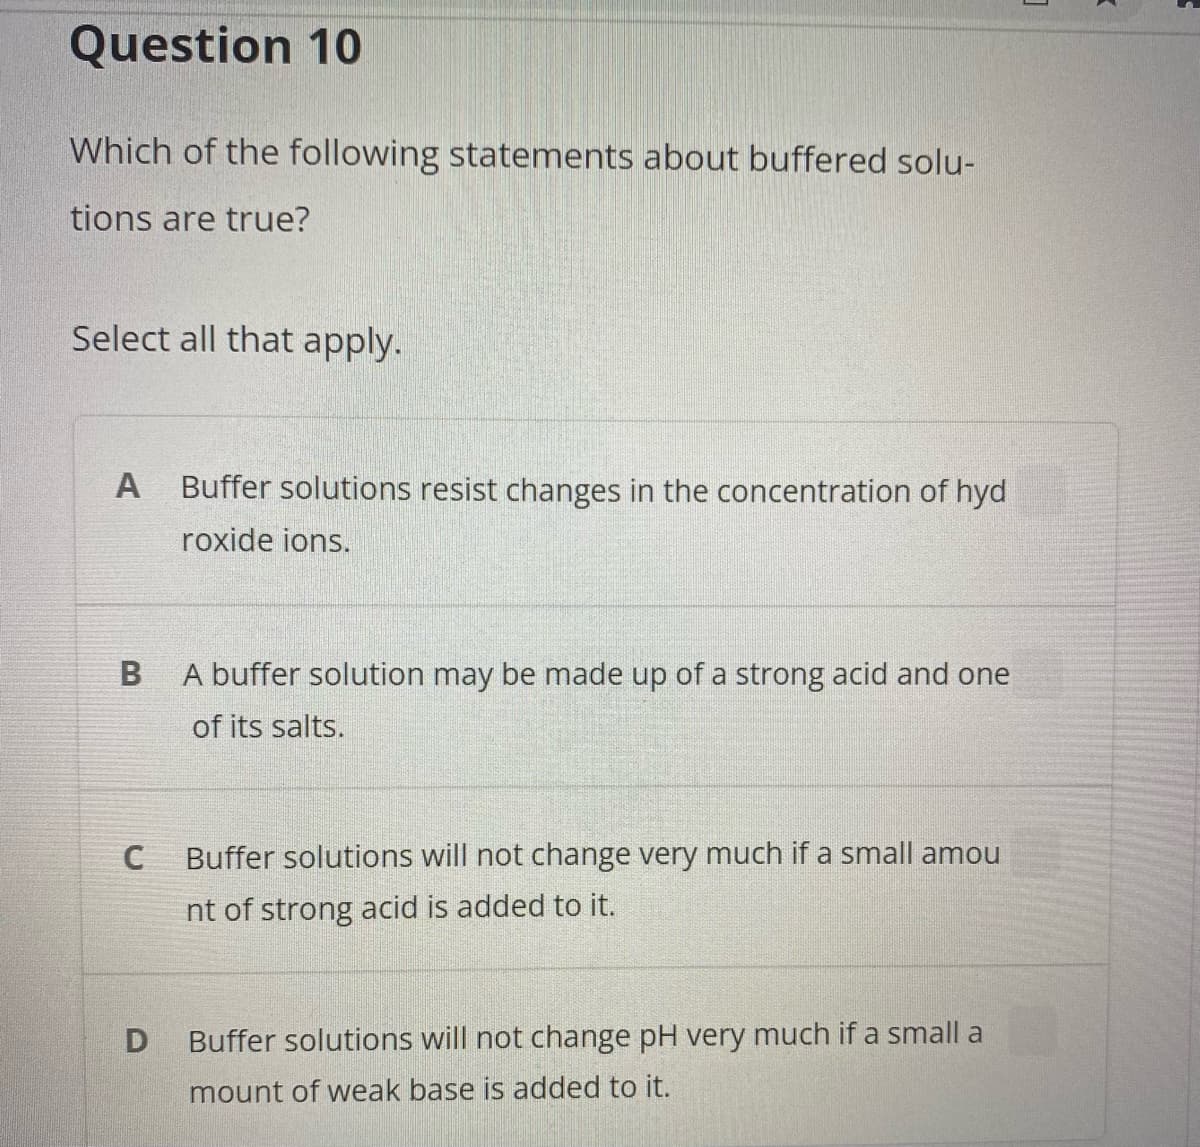 Question 10
Which of the following statements about buffered solu-
tions are true?
Select all that apply.
A
Buffer solutions resist changes in the concentration of hyd
roxide ions.
A buffer solution may be made up of a strong acid and one
of its salts.
C
Buffer solutions will not change very much if a small amou
nt of strong acid is added to it.
Buffer solutions will not change pH very much if a small a
mount of weak base is added to it.
